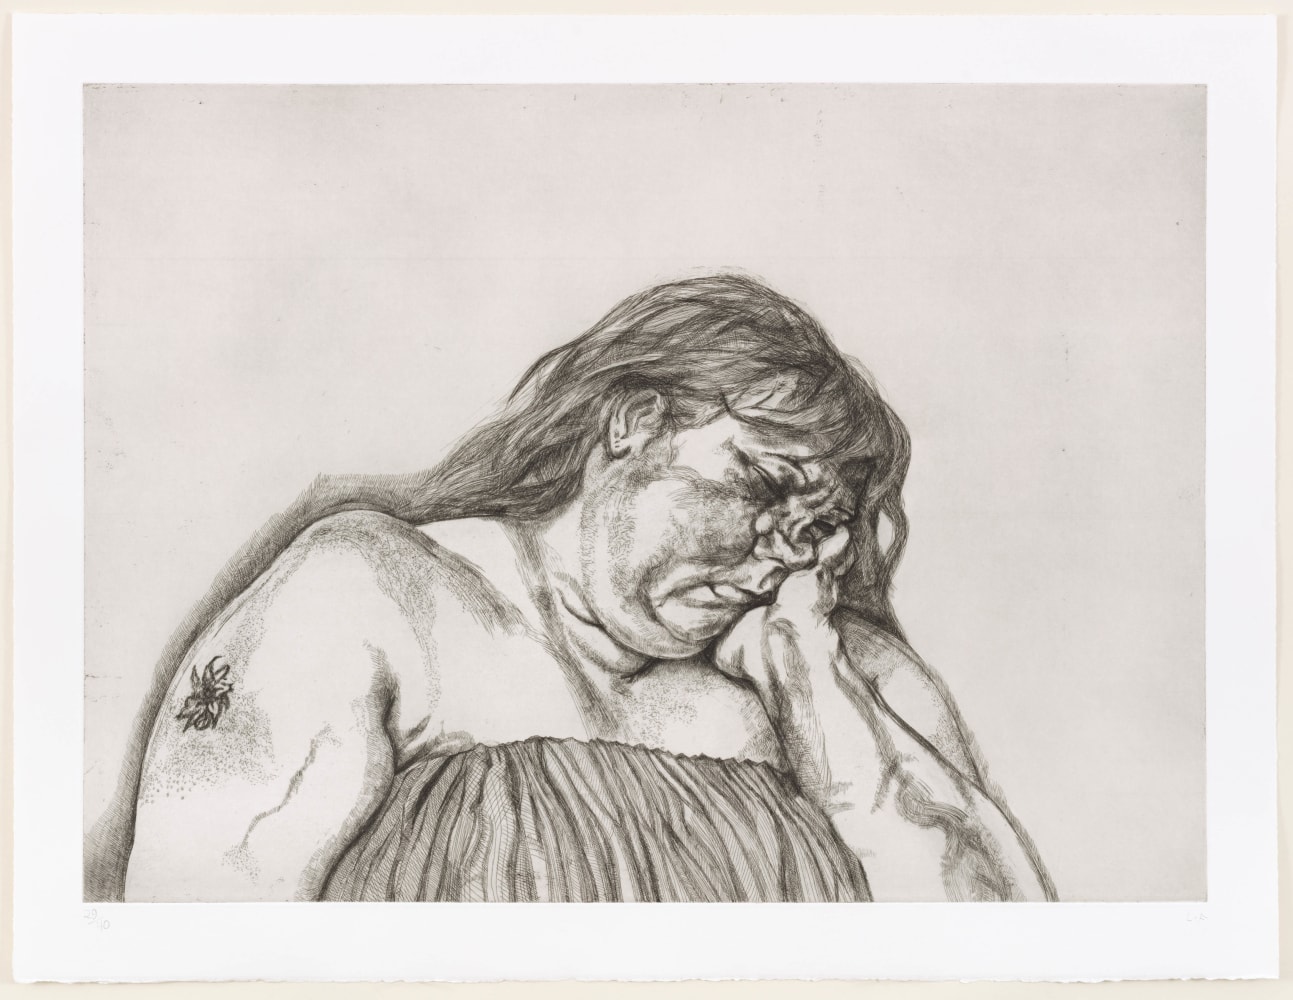 An etching of a woman with a singular upper arm tattoo by Lucian Freud